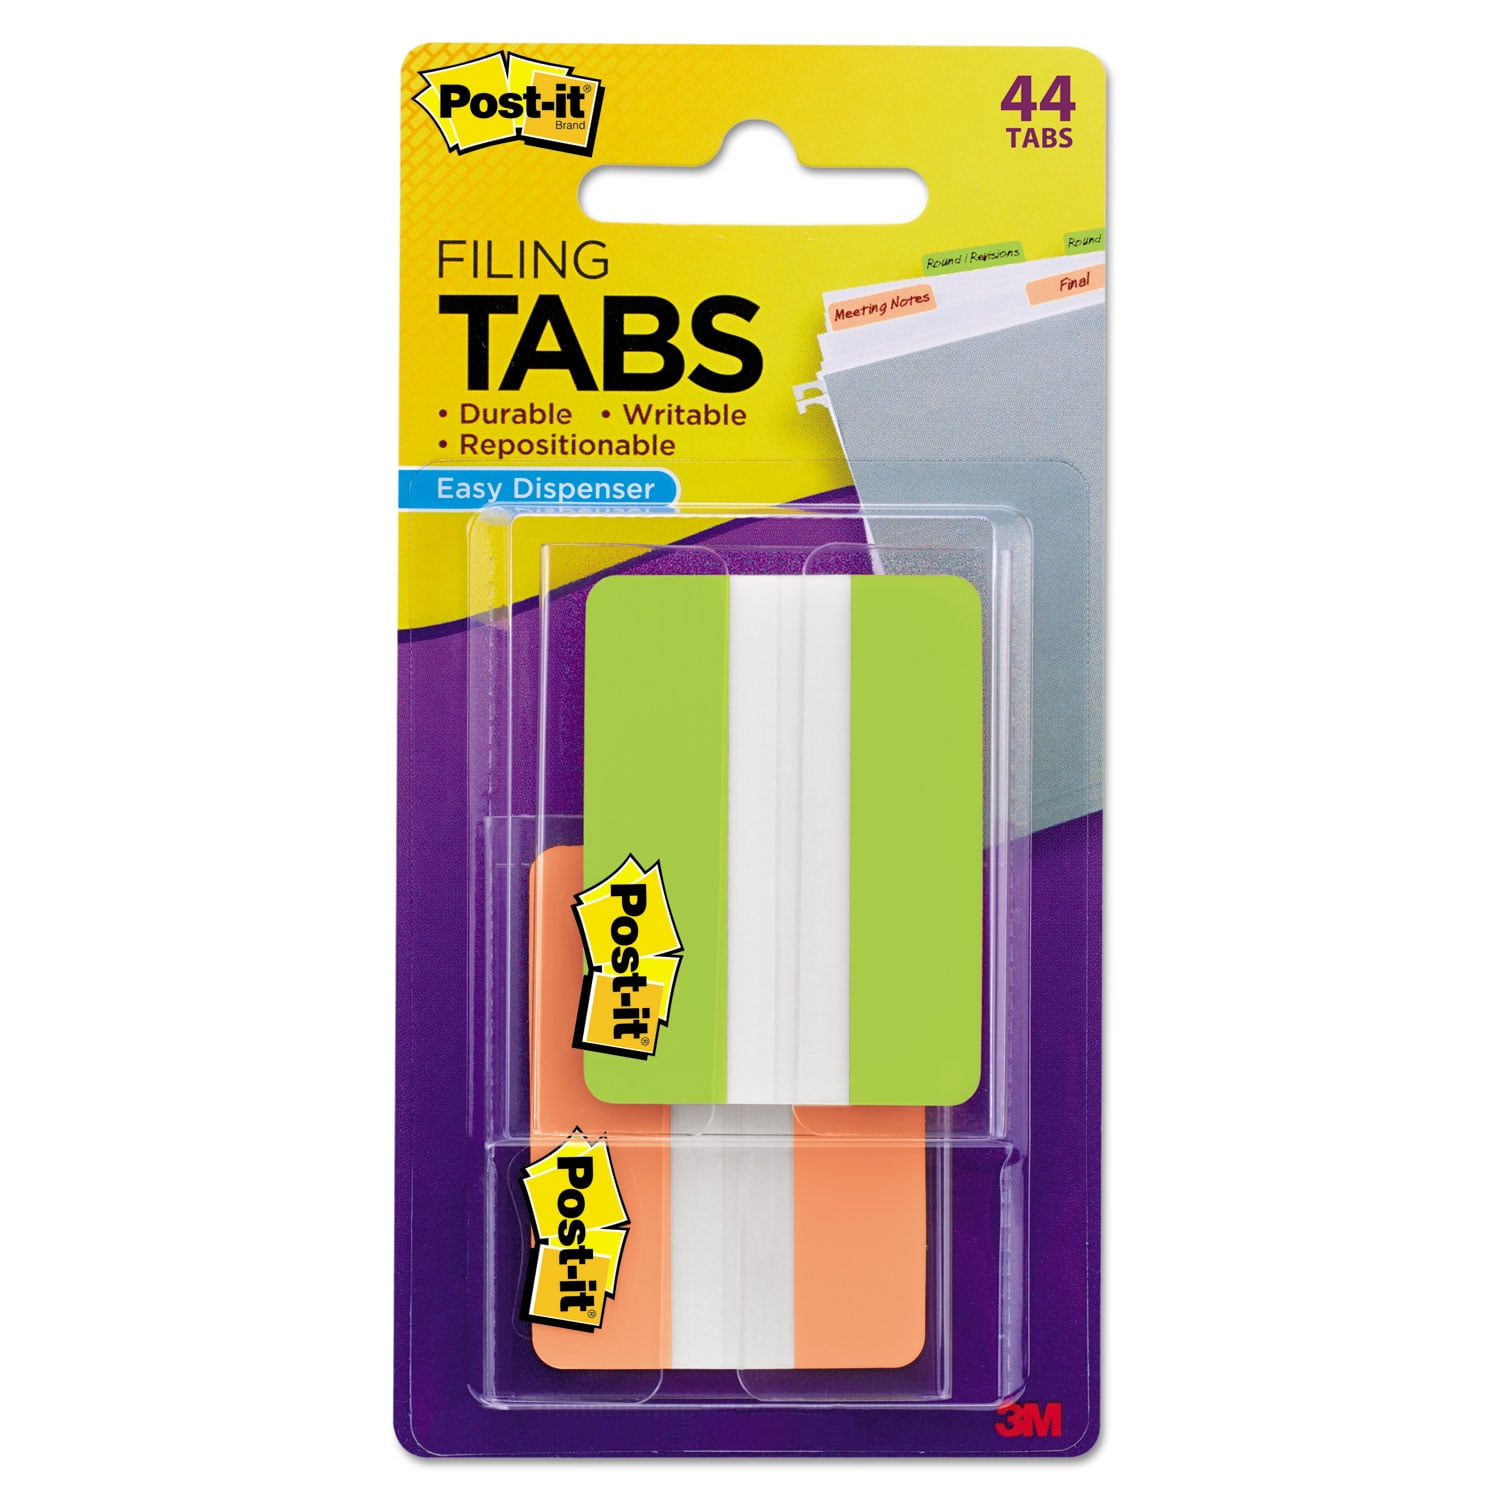 3M Post-It Tabs 3" x 1.5" 4 Bright Colors Durable Writable Repositionable 24pc 